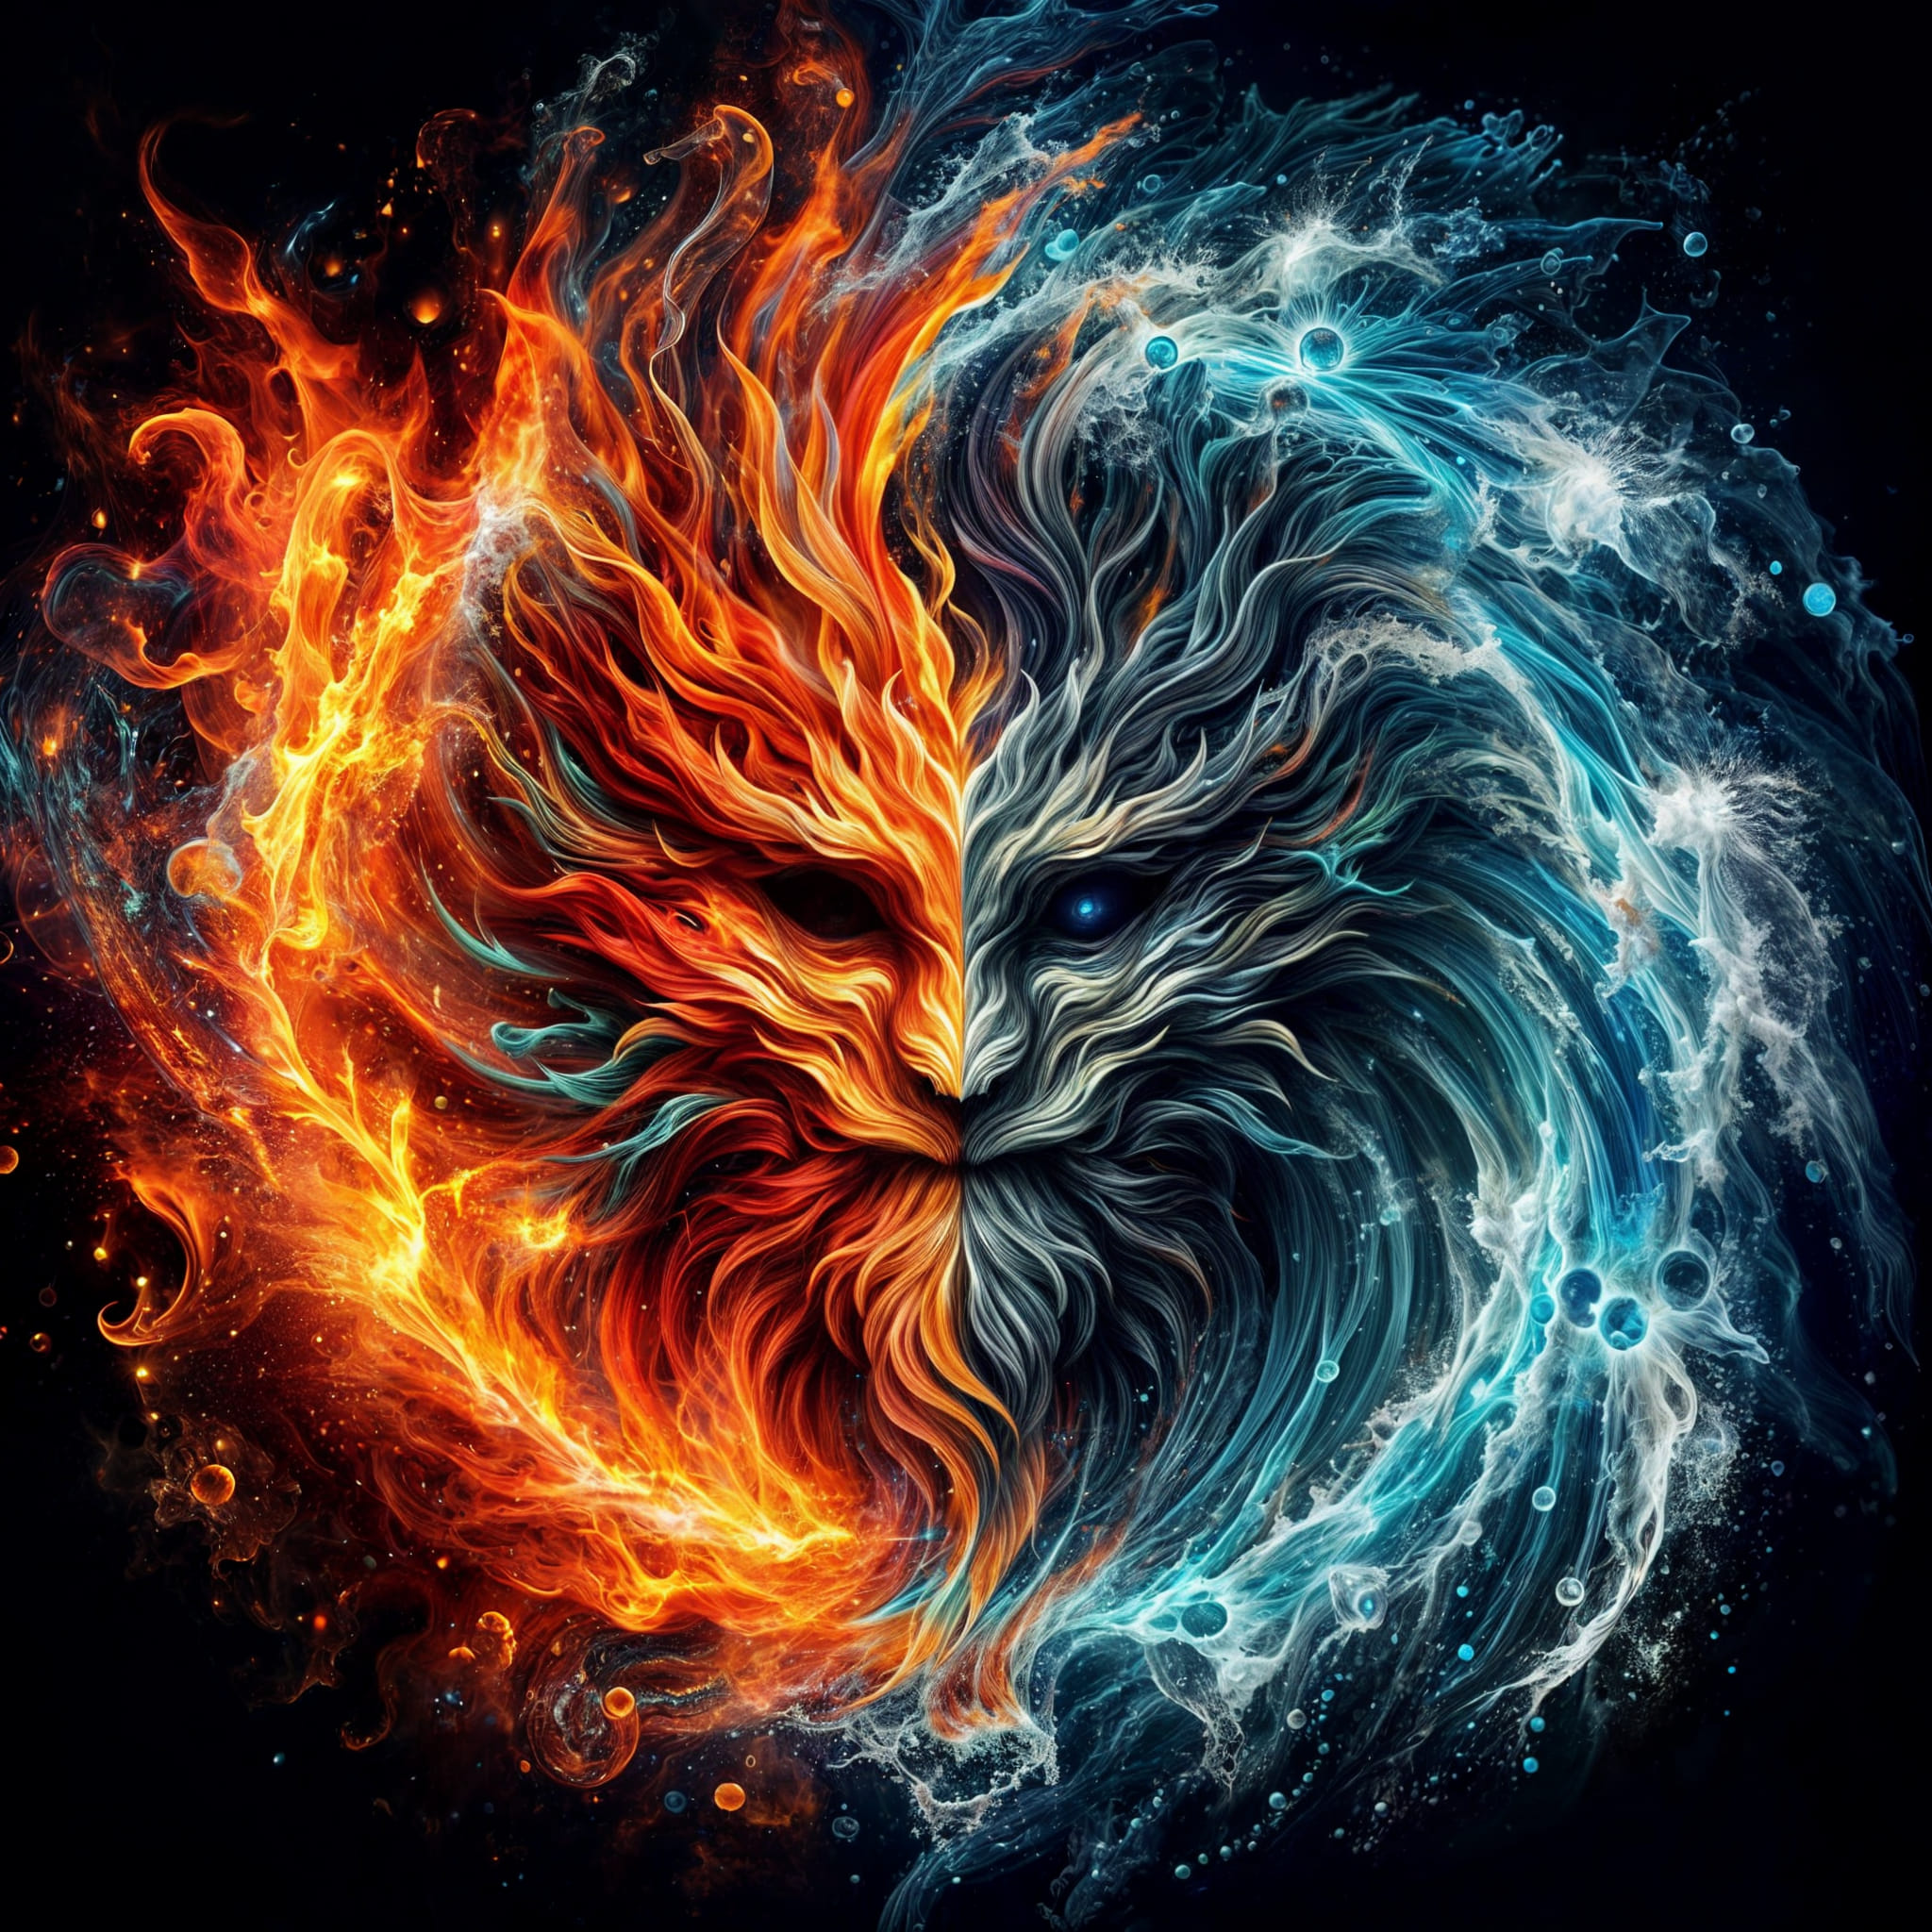 Generate an image of a mythical creature that embodies the elements of fire and ...